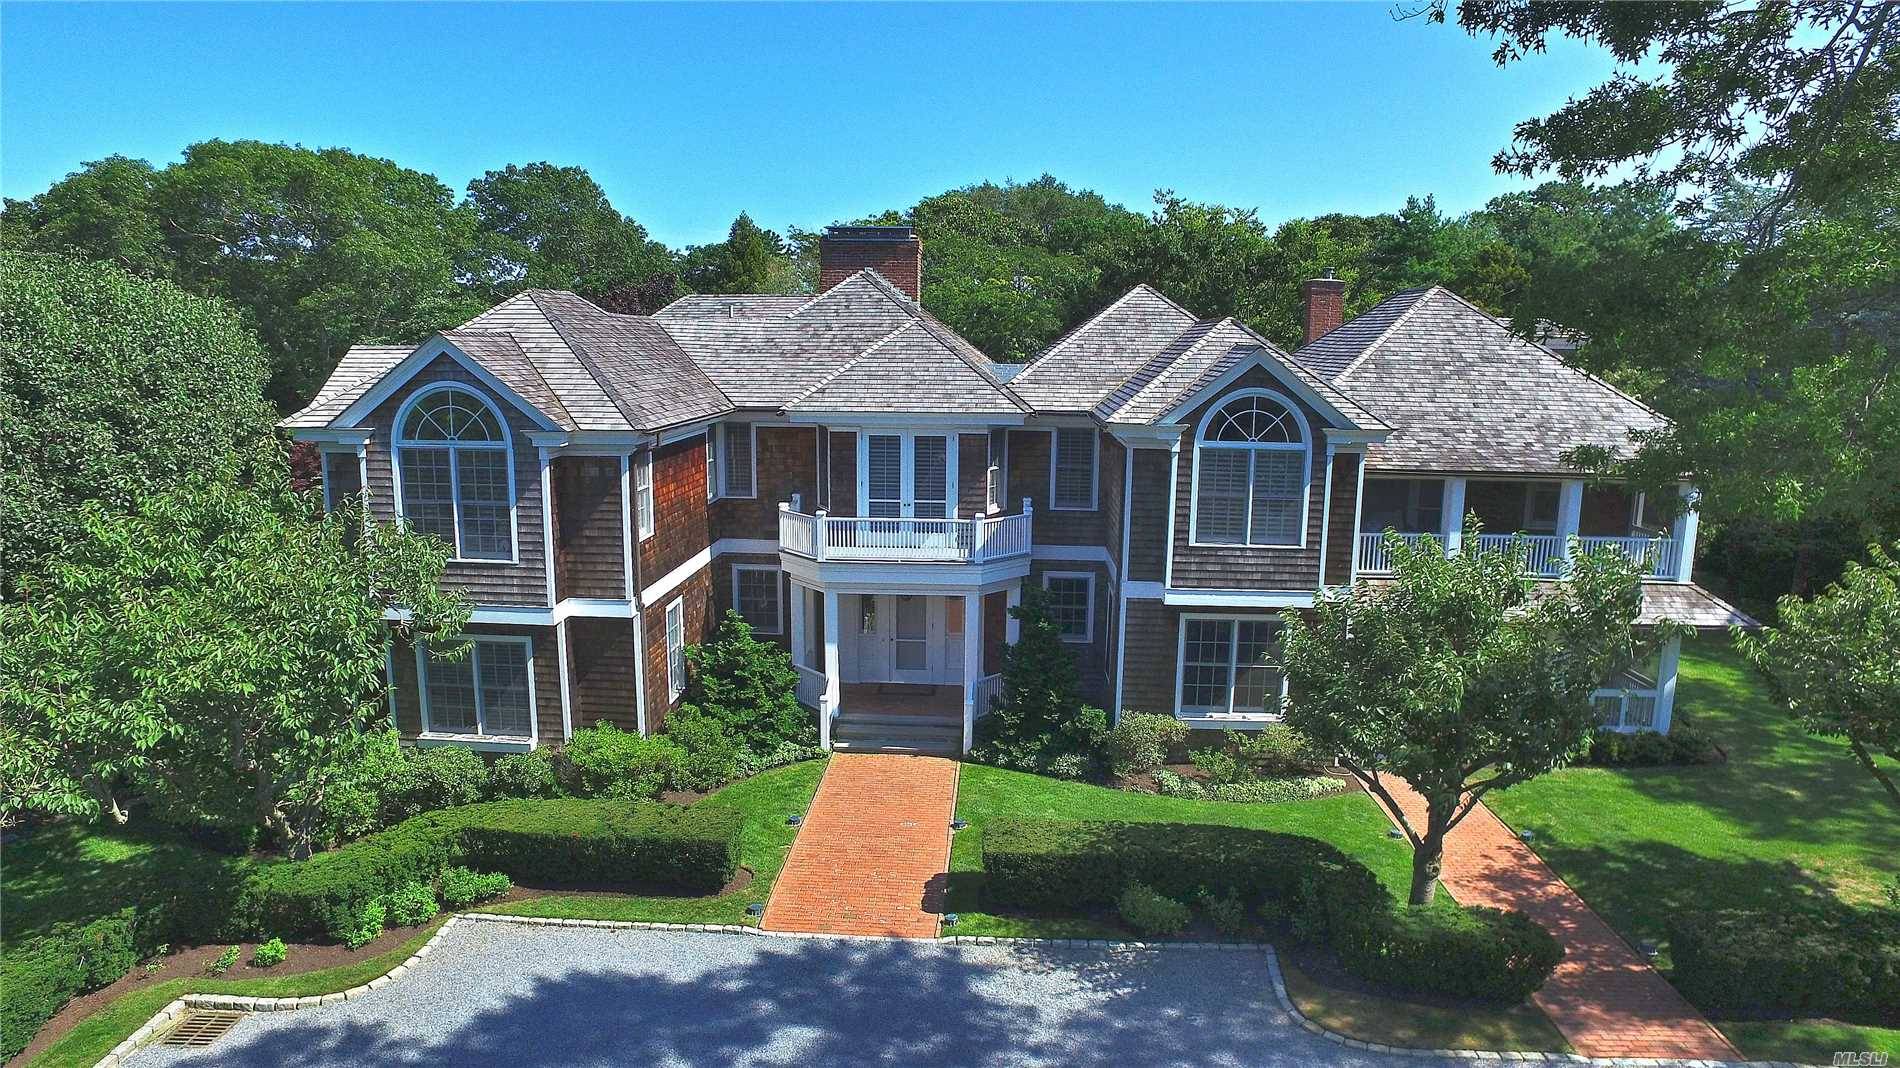 Welcome to 6 Bay Road, a seven bedroom, eight and one half bathroom Estate like no other, mixing the flair of the Gatsby era with modern day living and amenities, ...